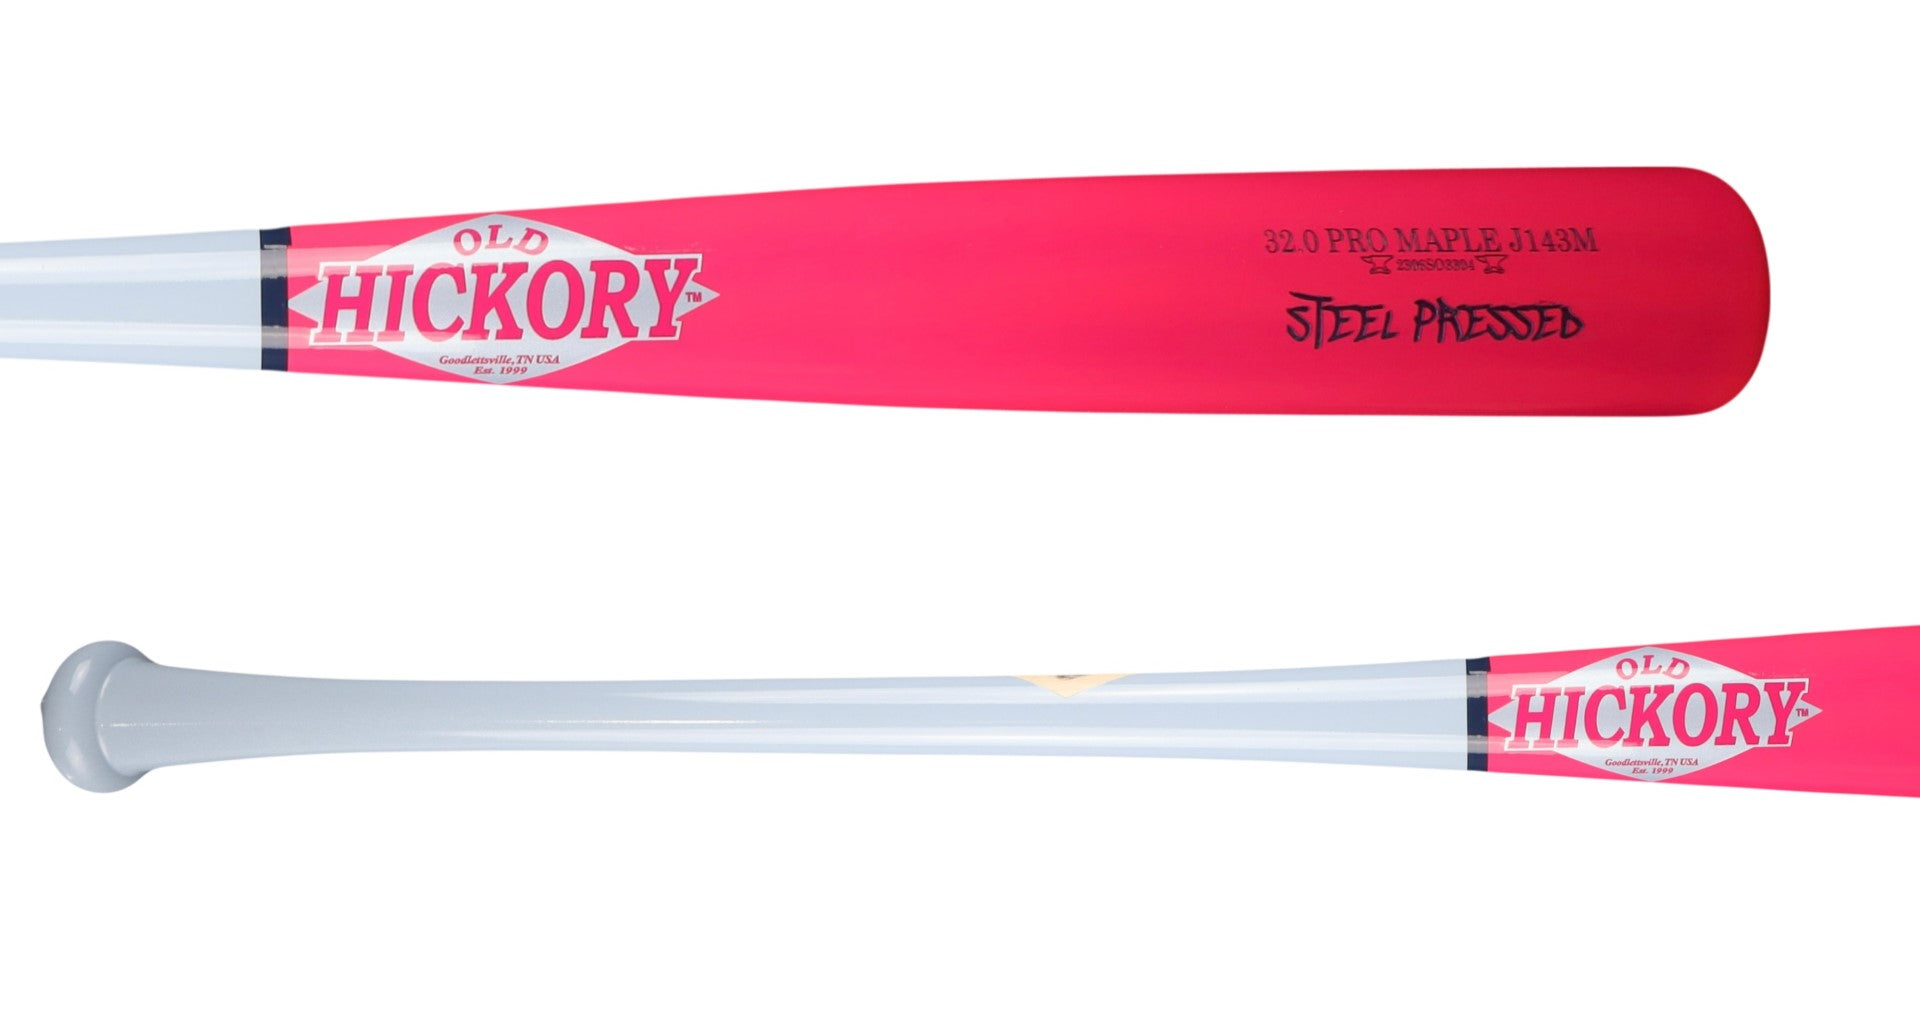 Old Hickory J143M Cotton Candy Steel Pressed